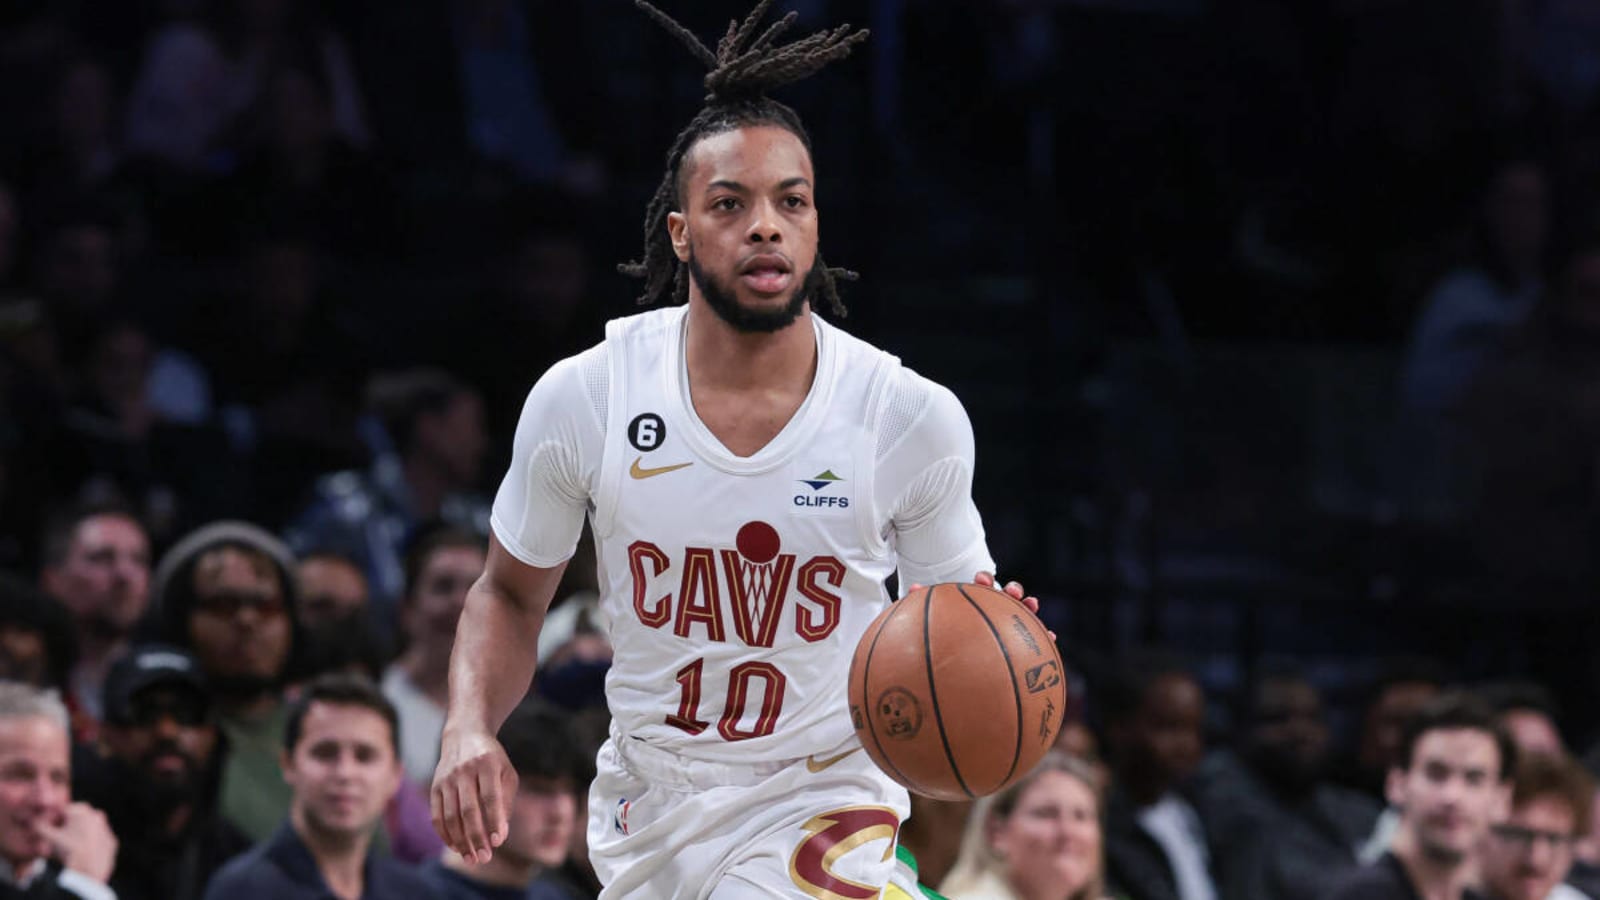 LeBron James May Have Been In Cleveland To Scout Darius Garland As A Potential Trade Target For The Lakers